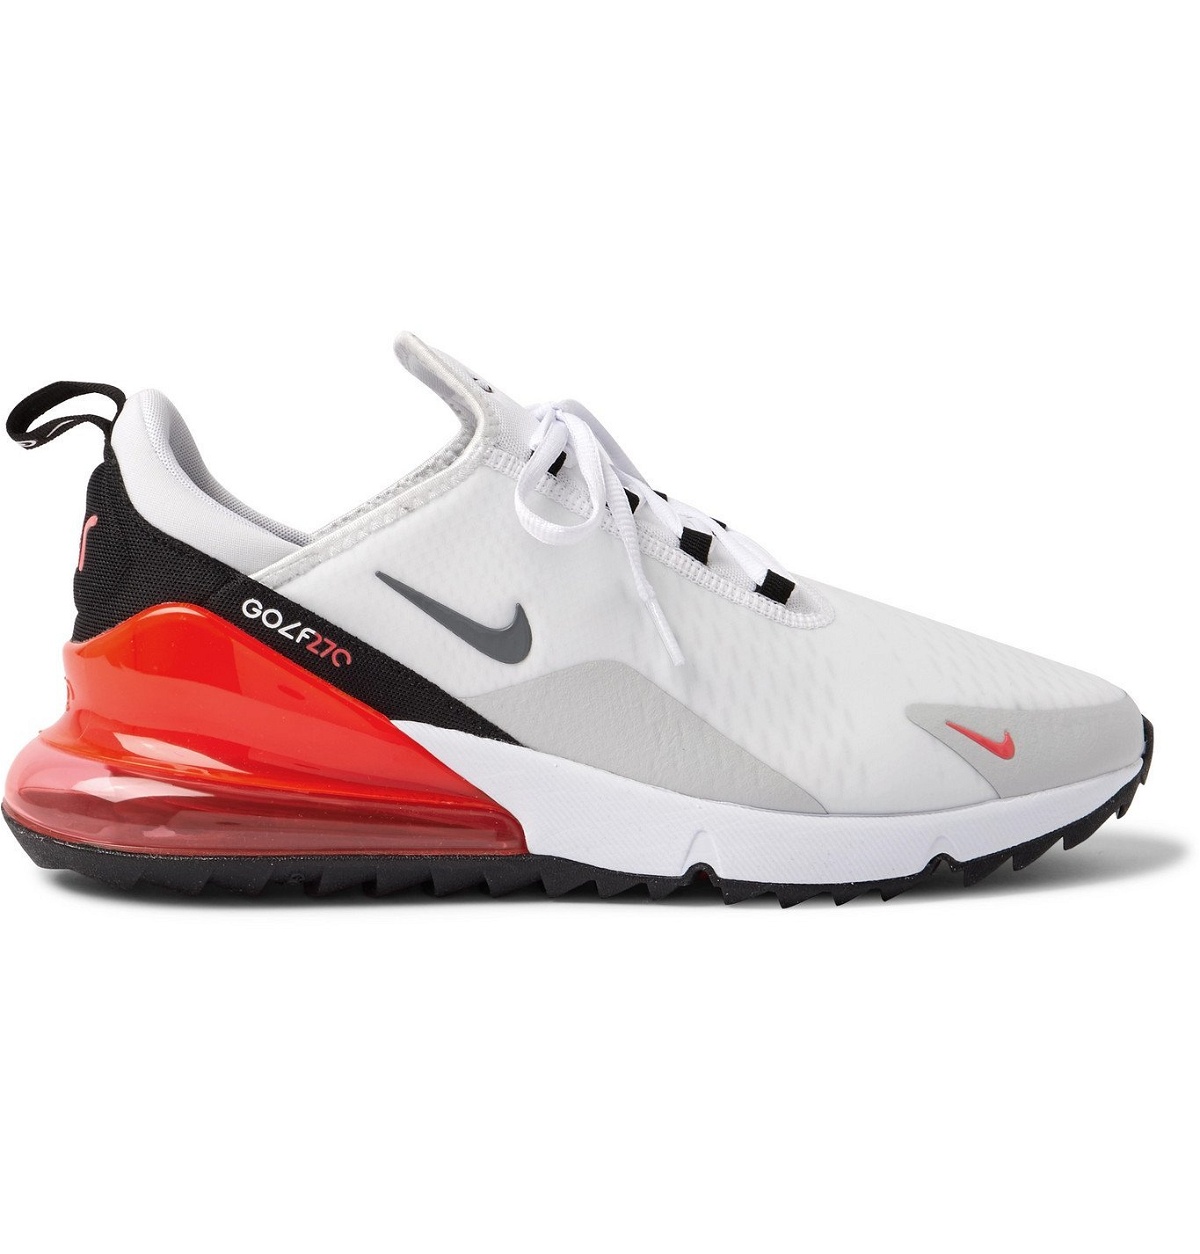 Nike Golf - Air Max 270 G Rubber-Trimmed Coated-Mesh Golf Shoes